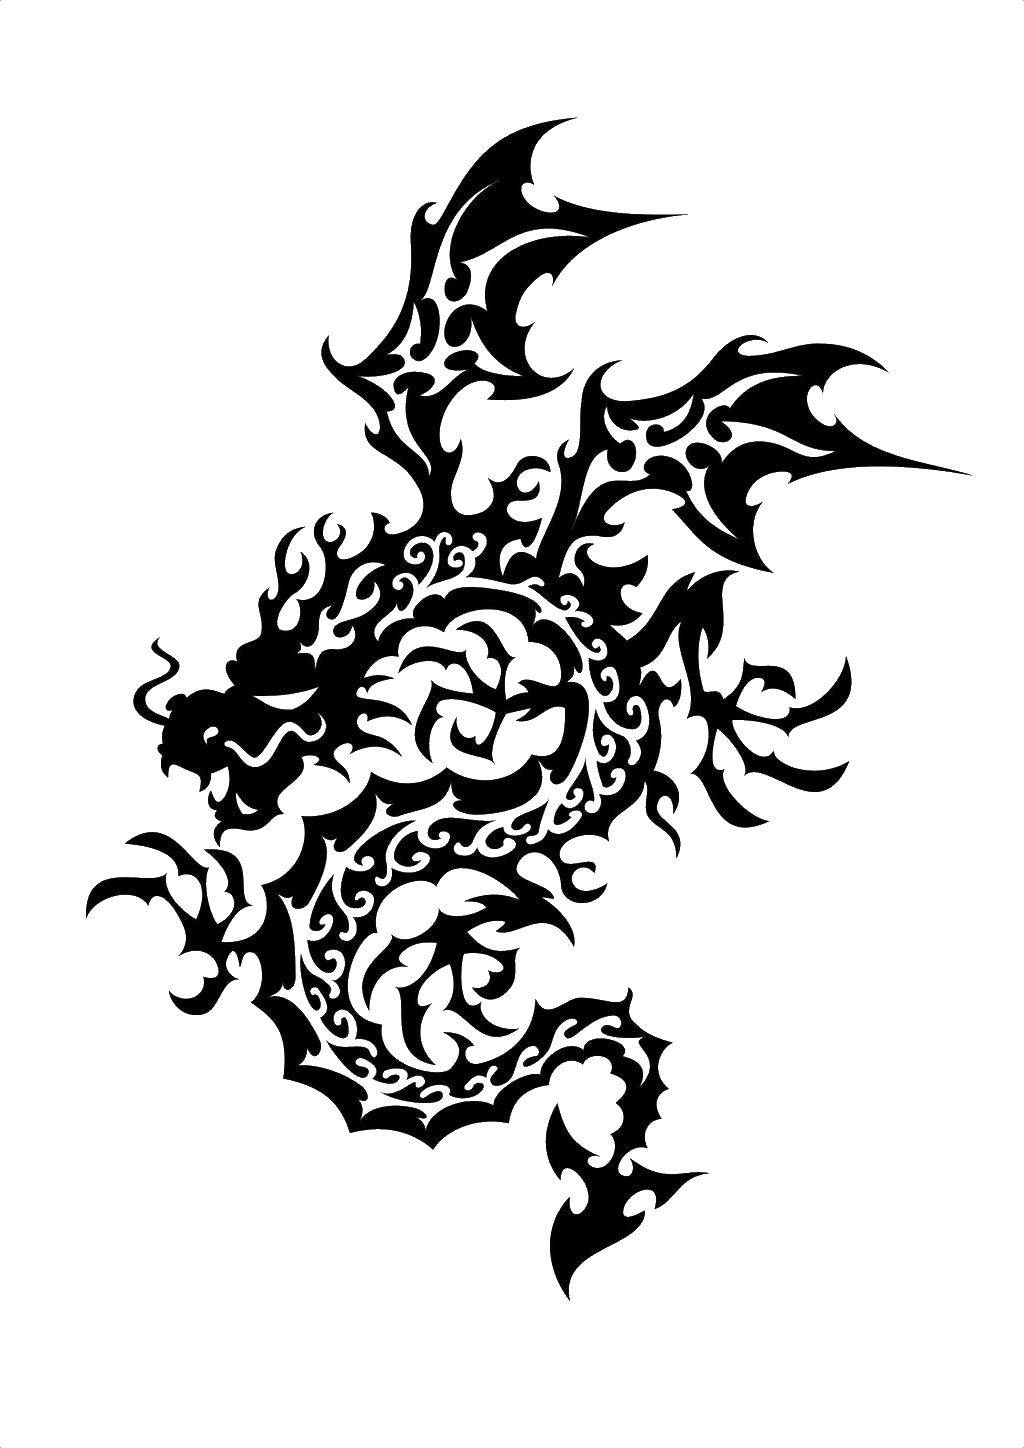 Coloring The outline of the dragon. Category Dragons. Tags:  dragons, dragon, contour.